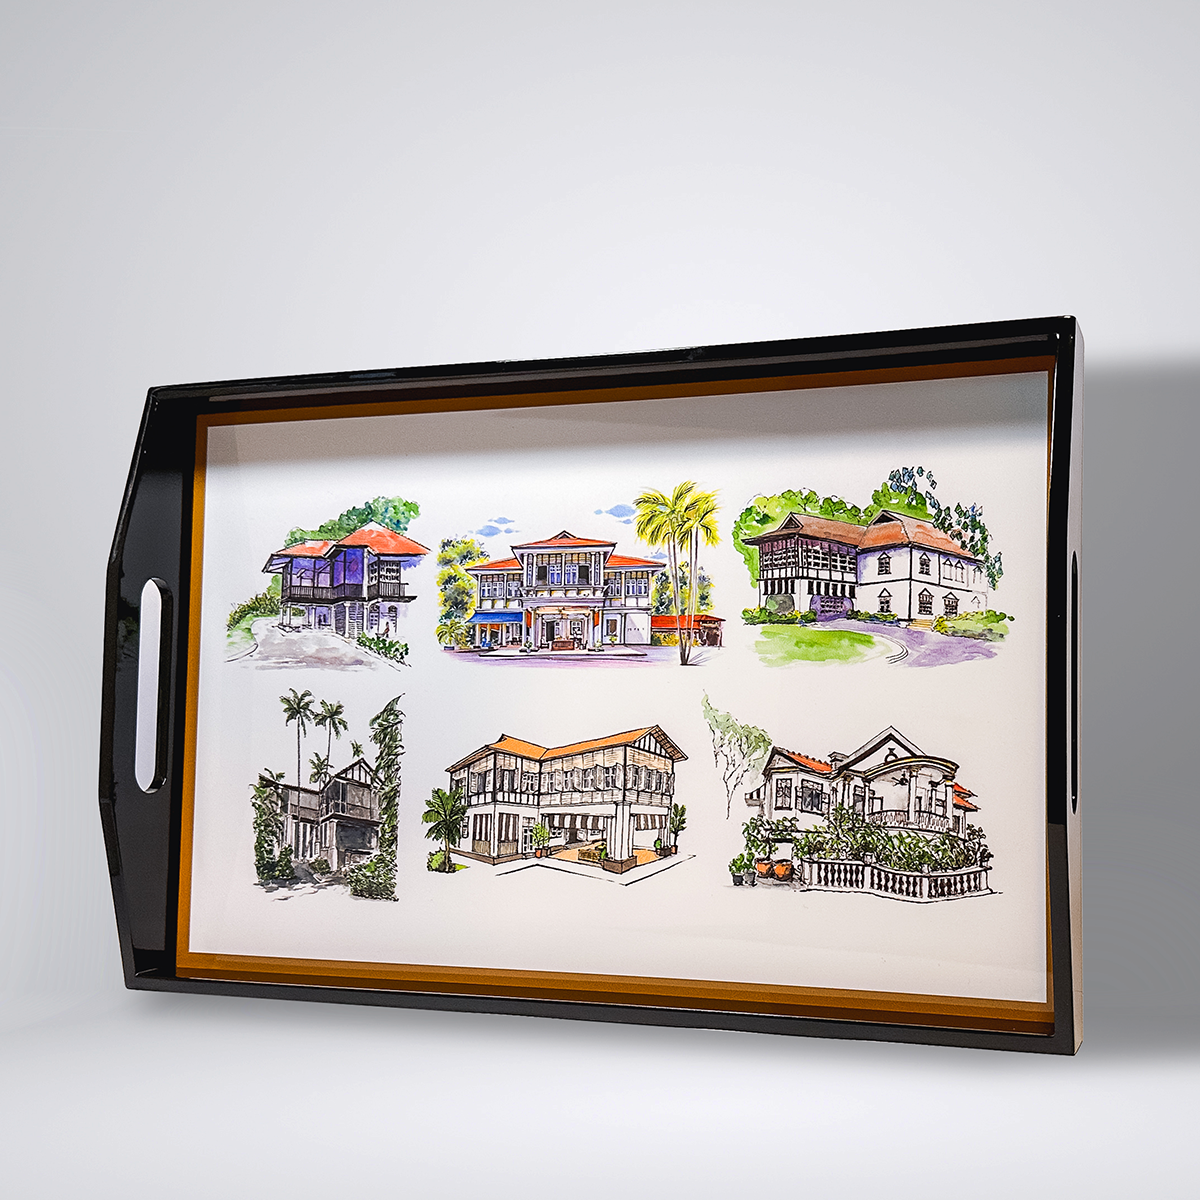 Singapore Themed Black Lacquer Tray - Black & White Houses